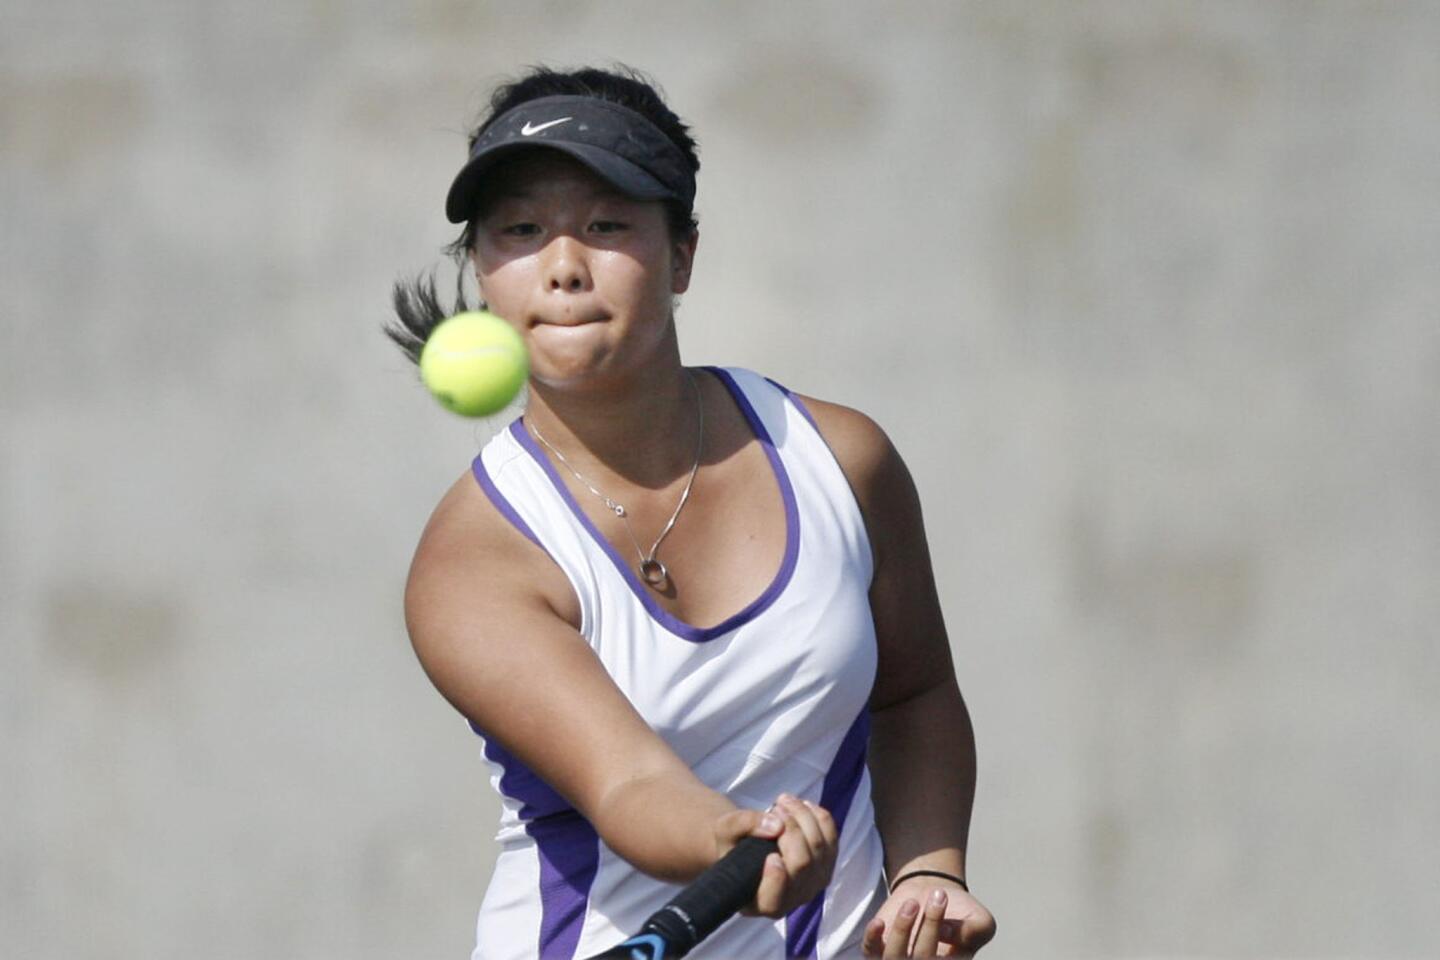 Hoover's Sara Kim hits the ball during a match against Burroughs at Hoover High School in Glendale on Tuesday, September 11, 2012.